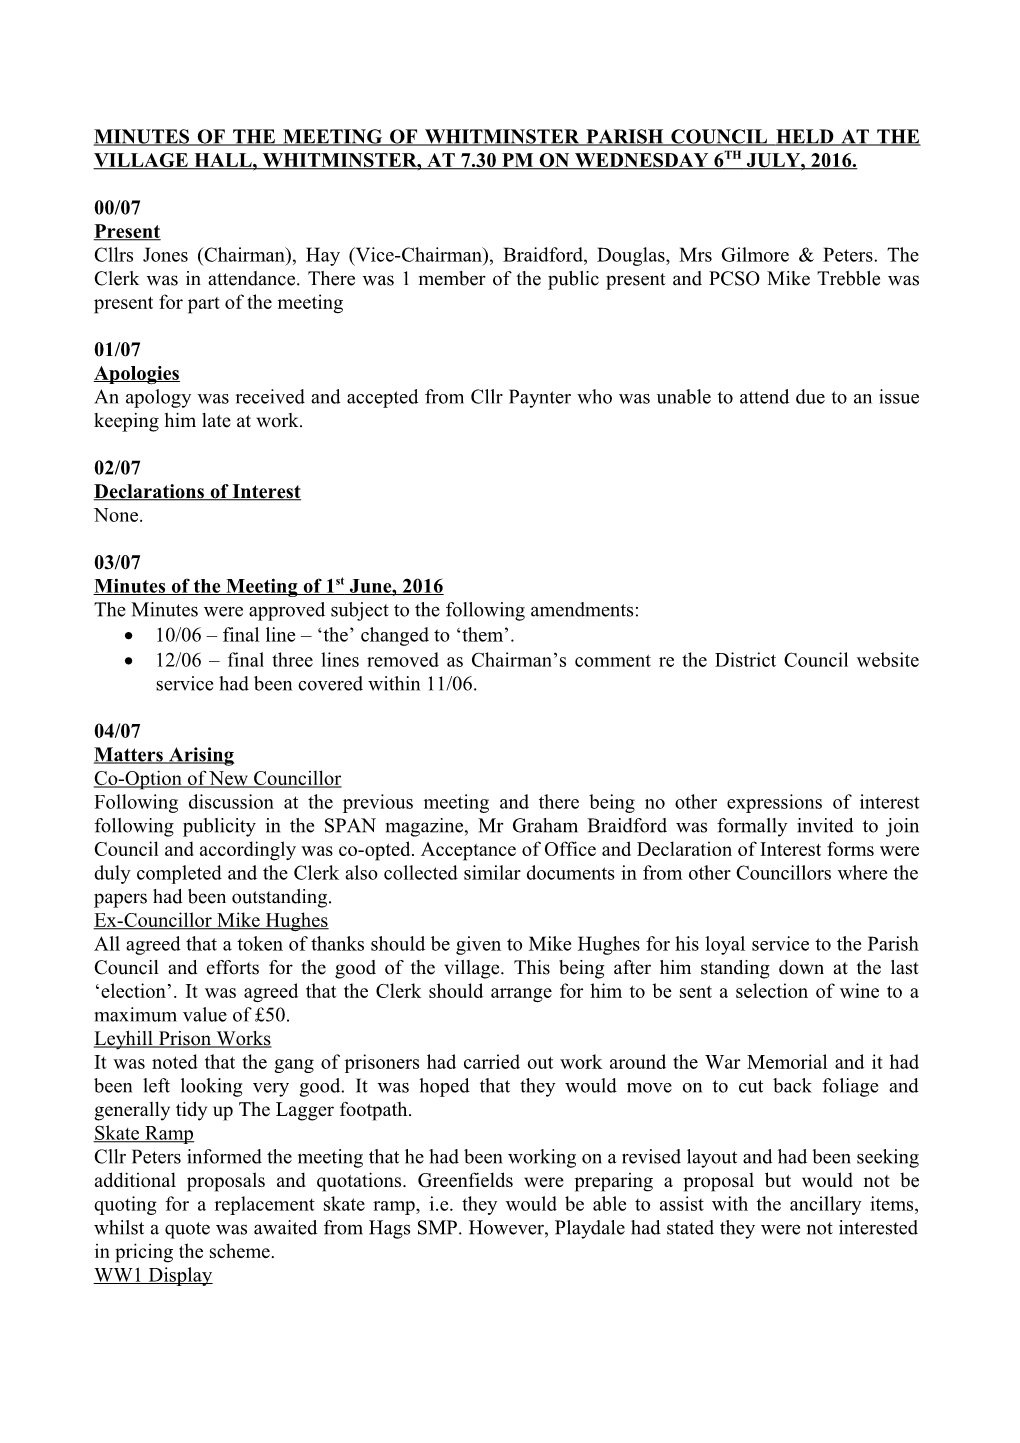 Minutes of the Meeting of Whitminster Parish Council